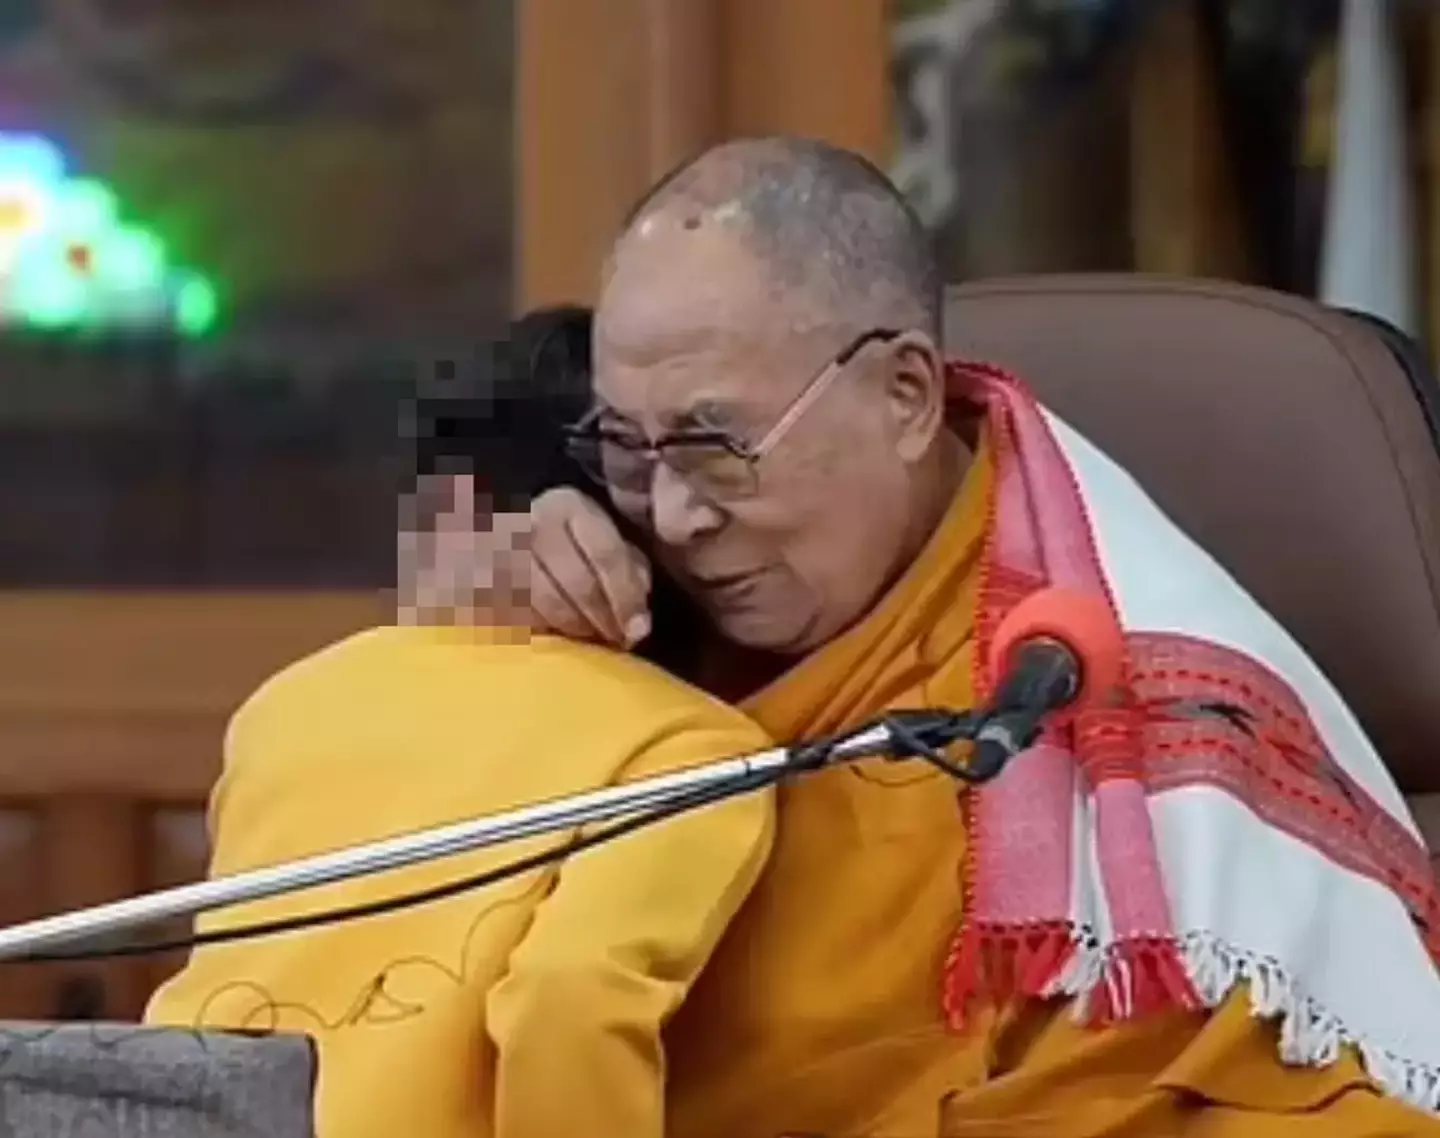 Footage of the Dalai Lama shows him embracing and kissing the boy.